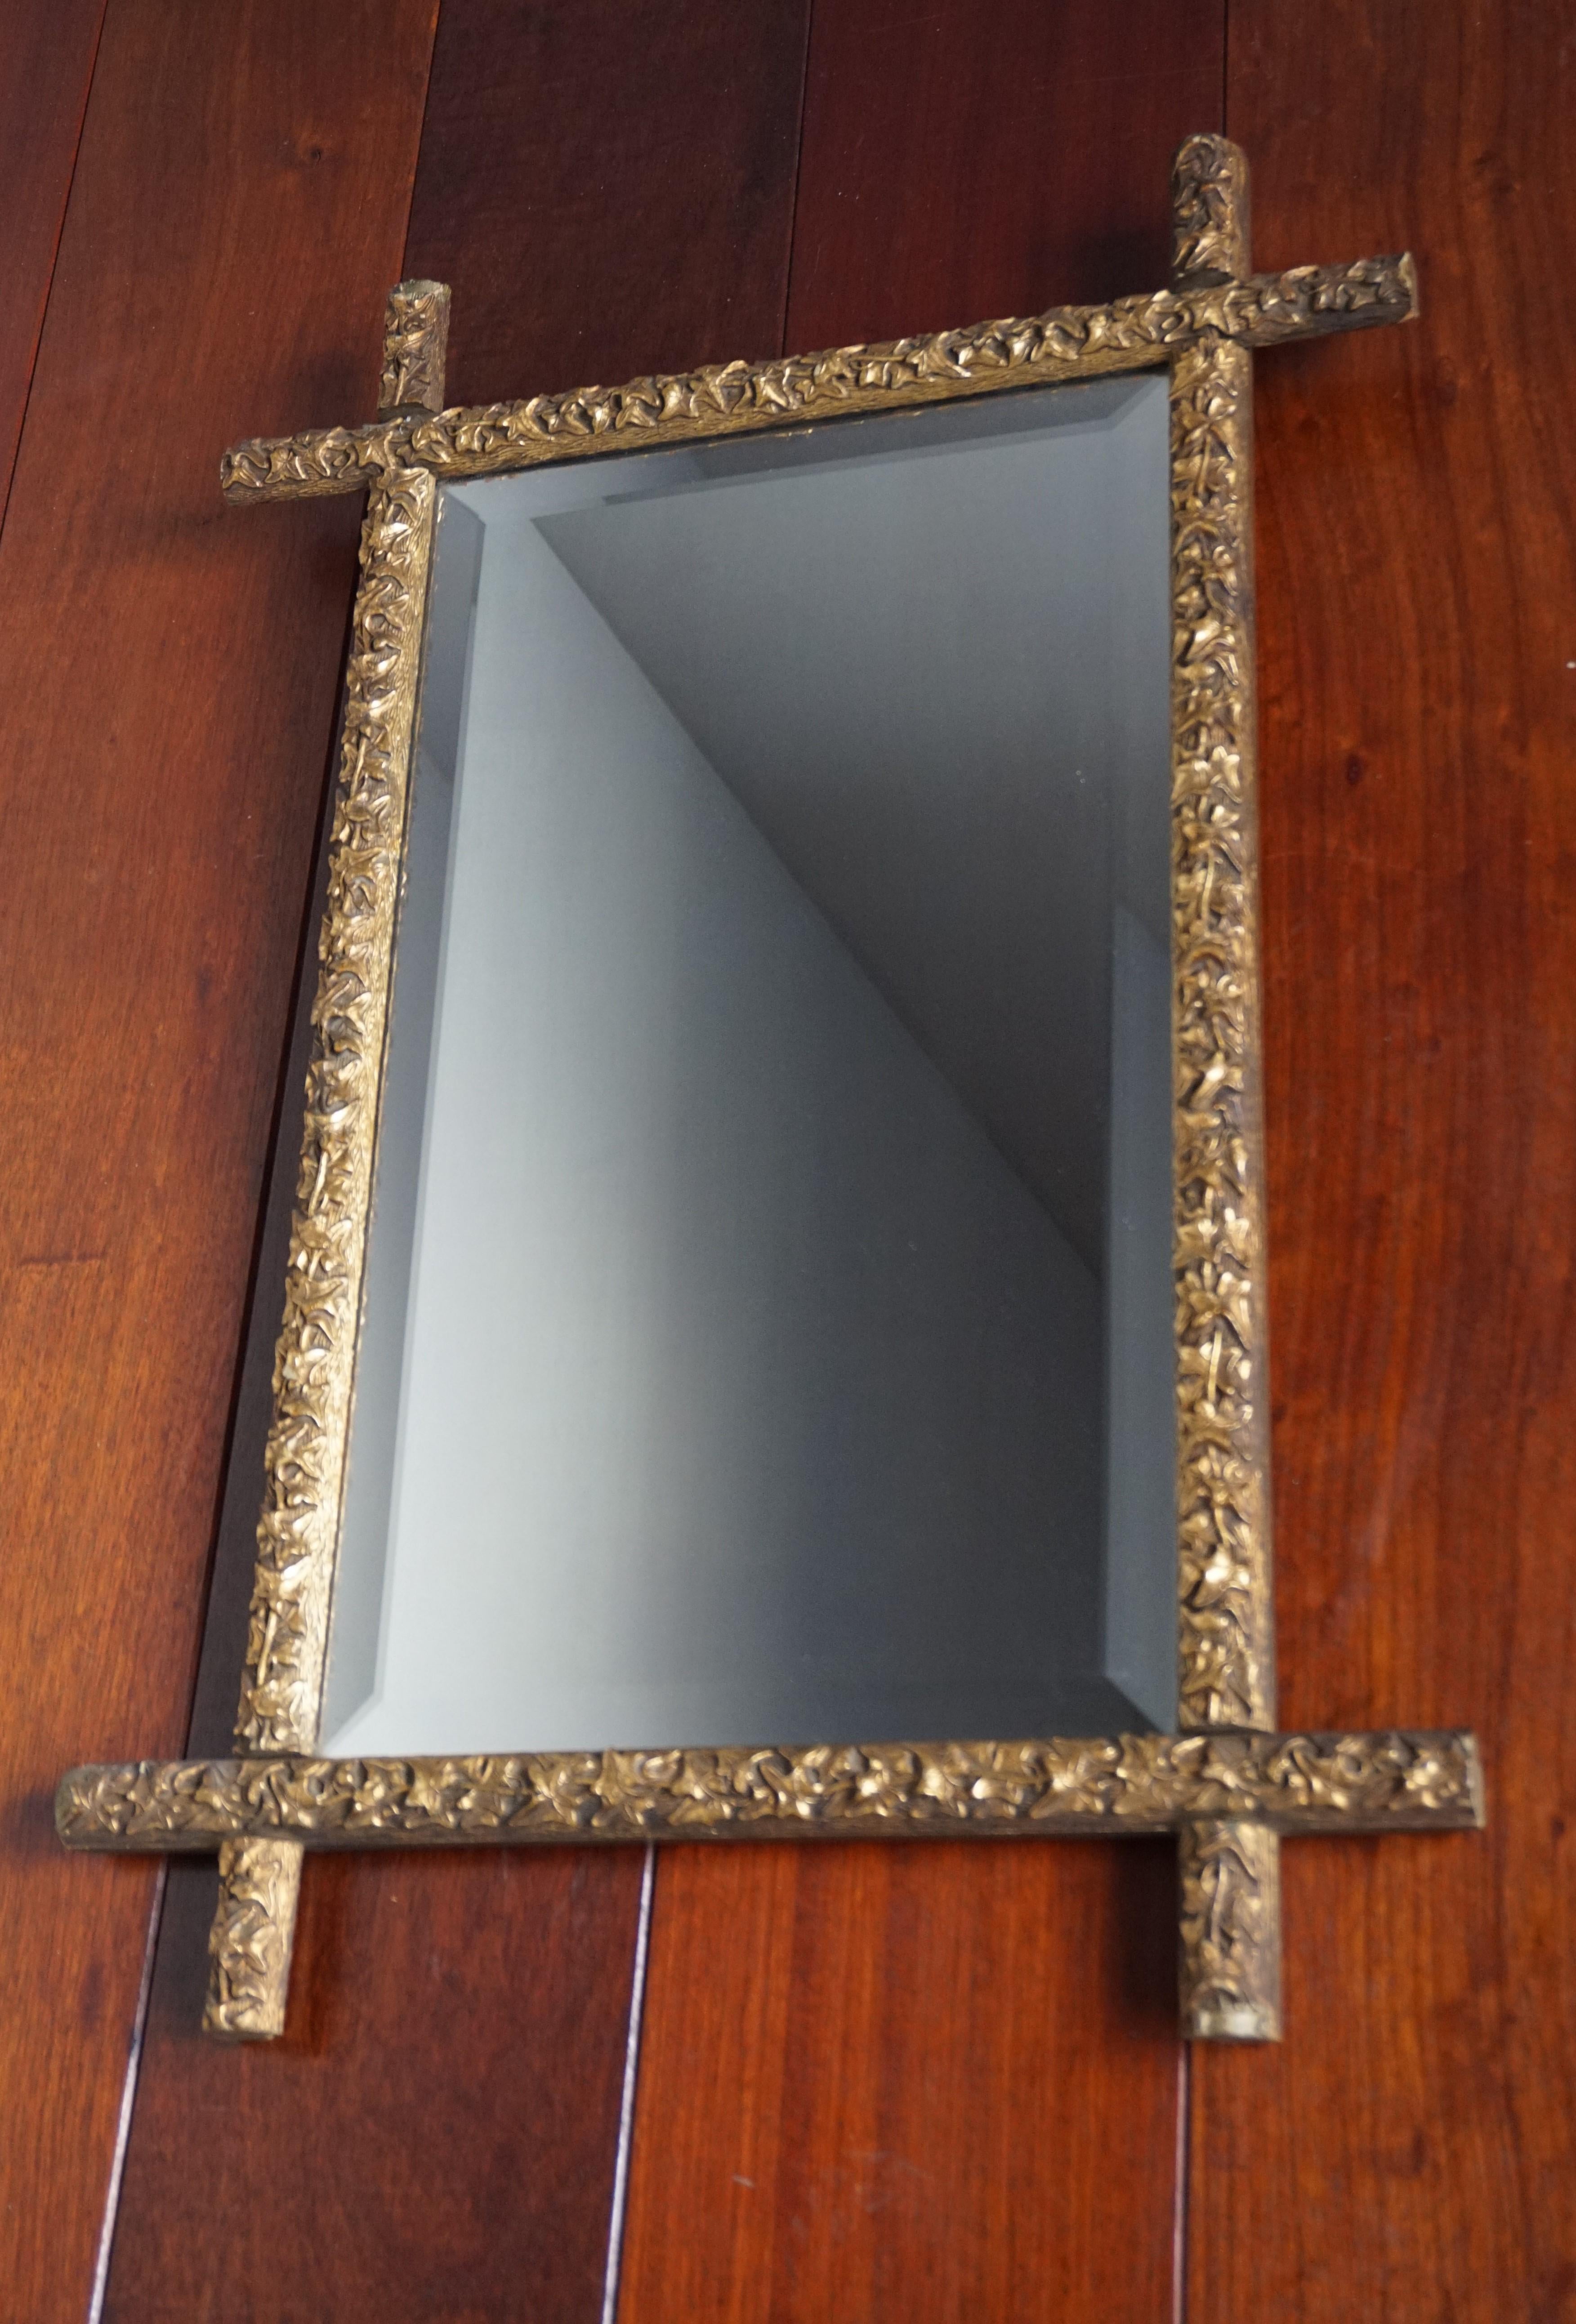 Rare and remarkable handcrafted Gothic wall mirror.

This stylish antique is what is known as a 'cross mirror' and it is another one of our recent remarkable finds. It does not take a genius to figure out why this antique wall mirror is called a